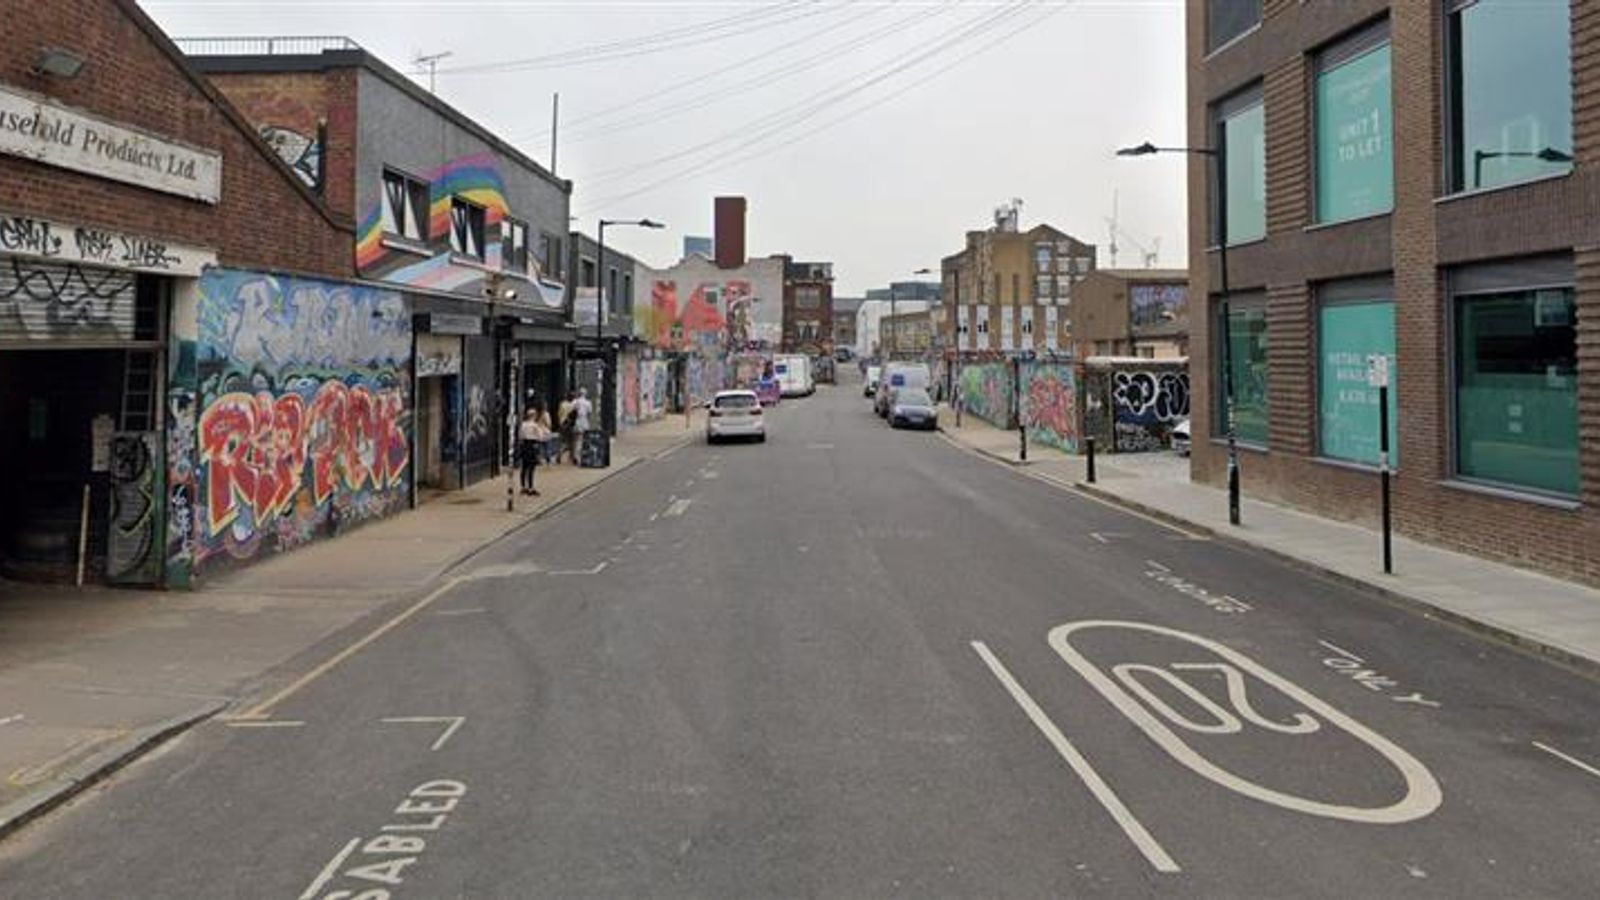 Two killed and another injured in separate stabbing incidents in London